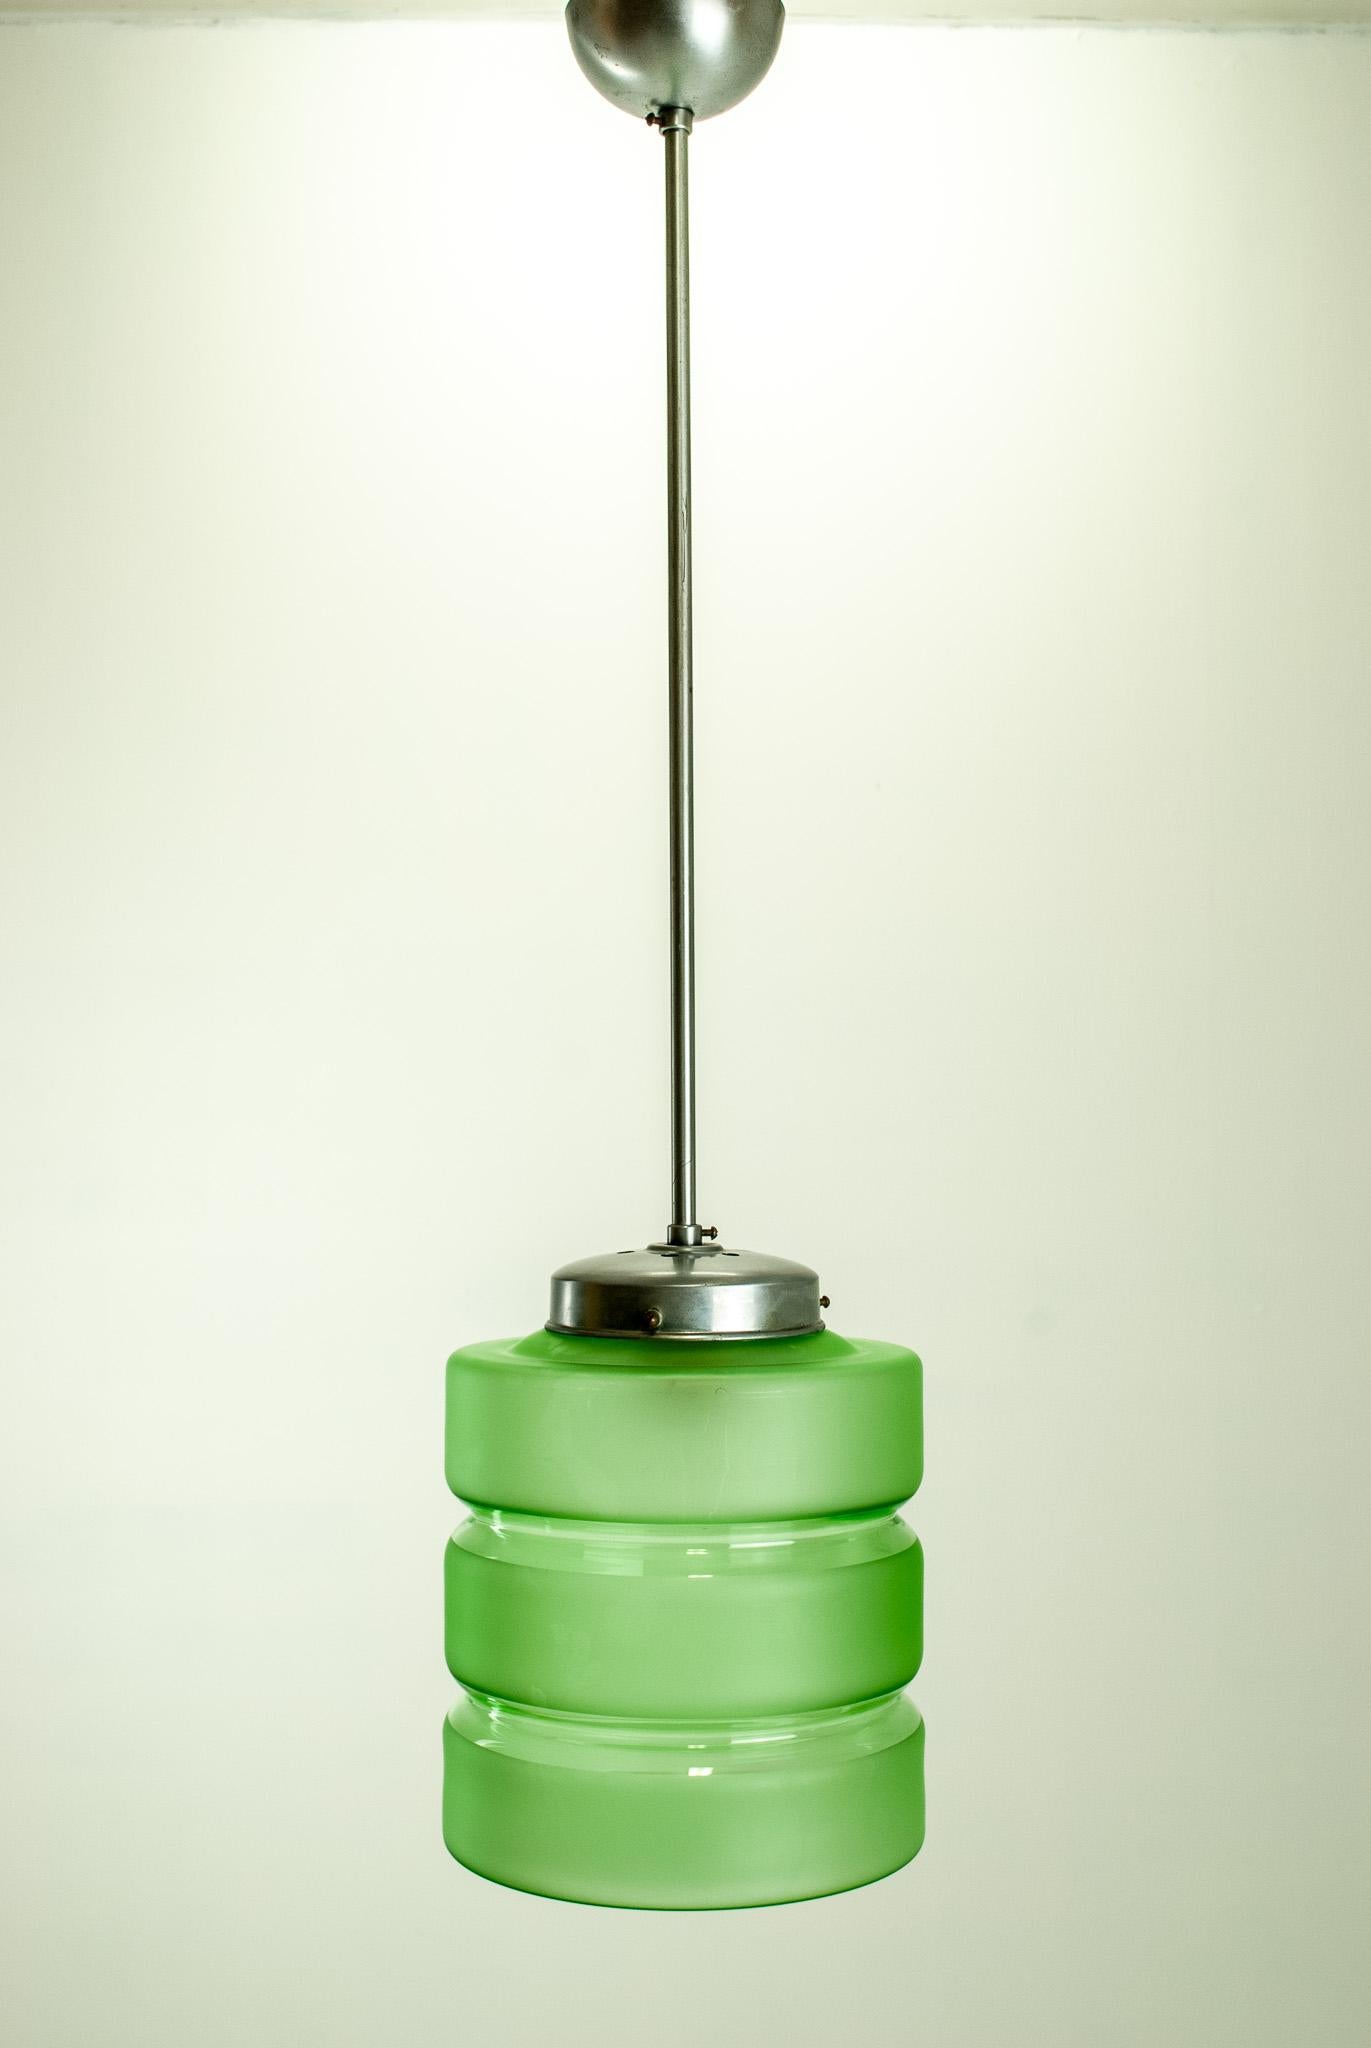 Rare sweish modern lamp from early midcentury. Style of Bauhaus. 